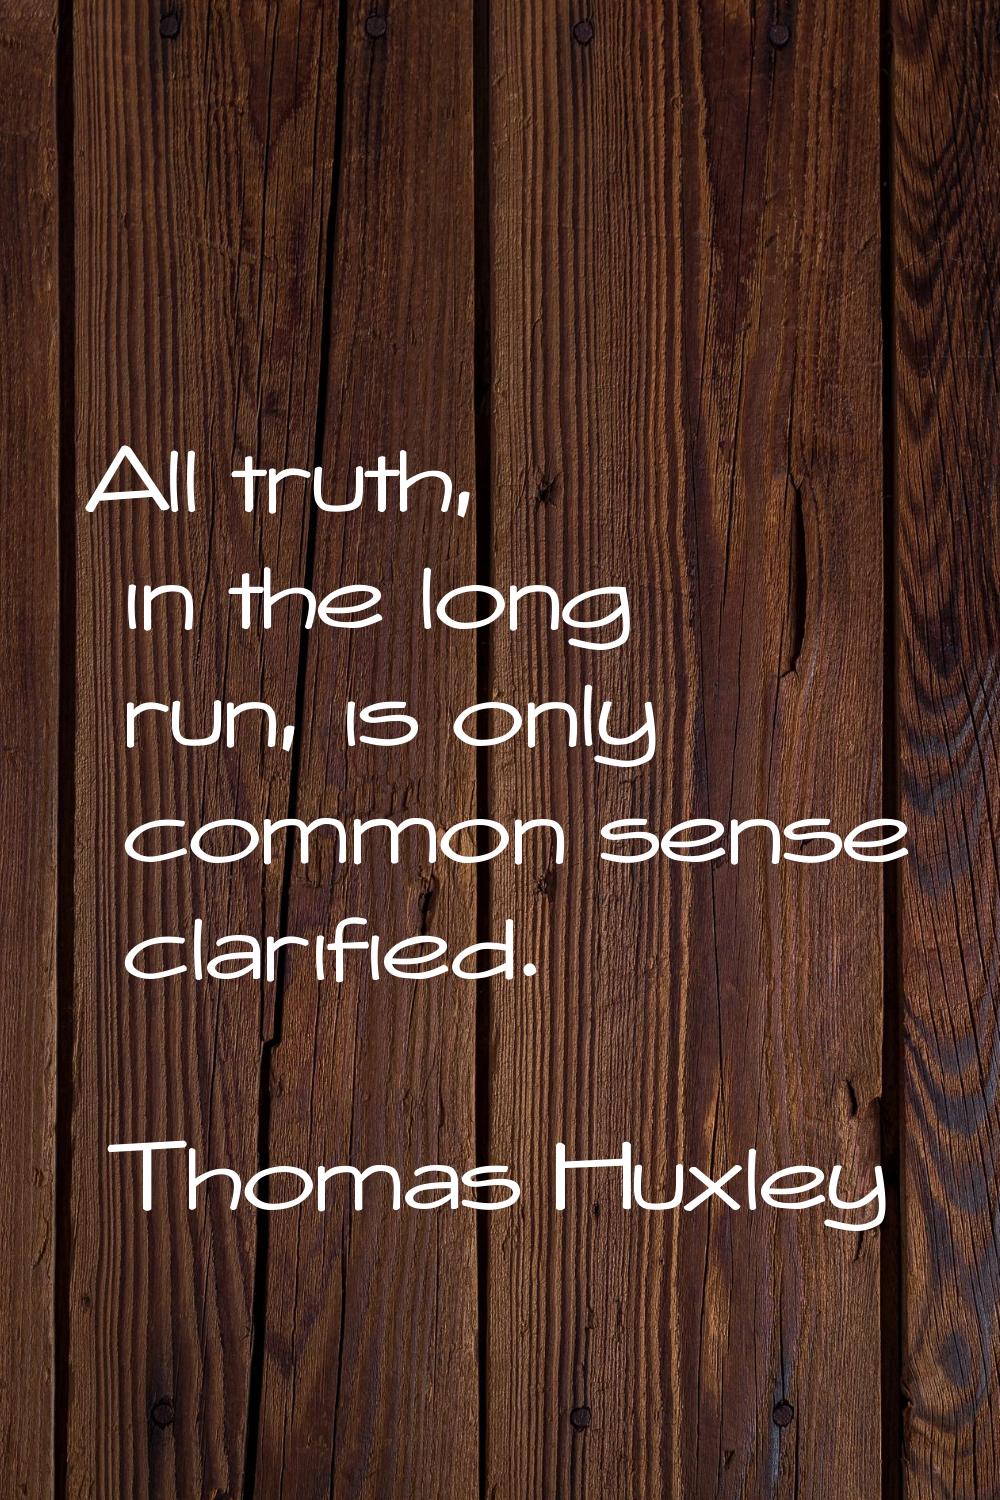 All truth, in the long run, is only common sense clarified.